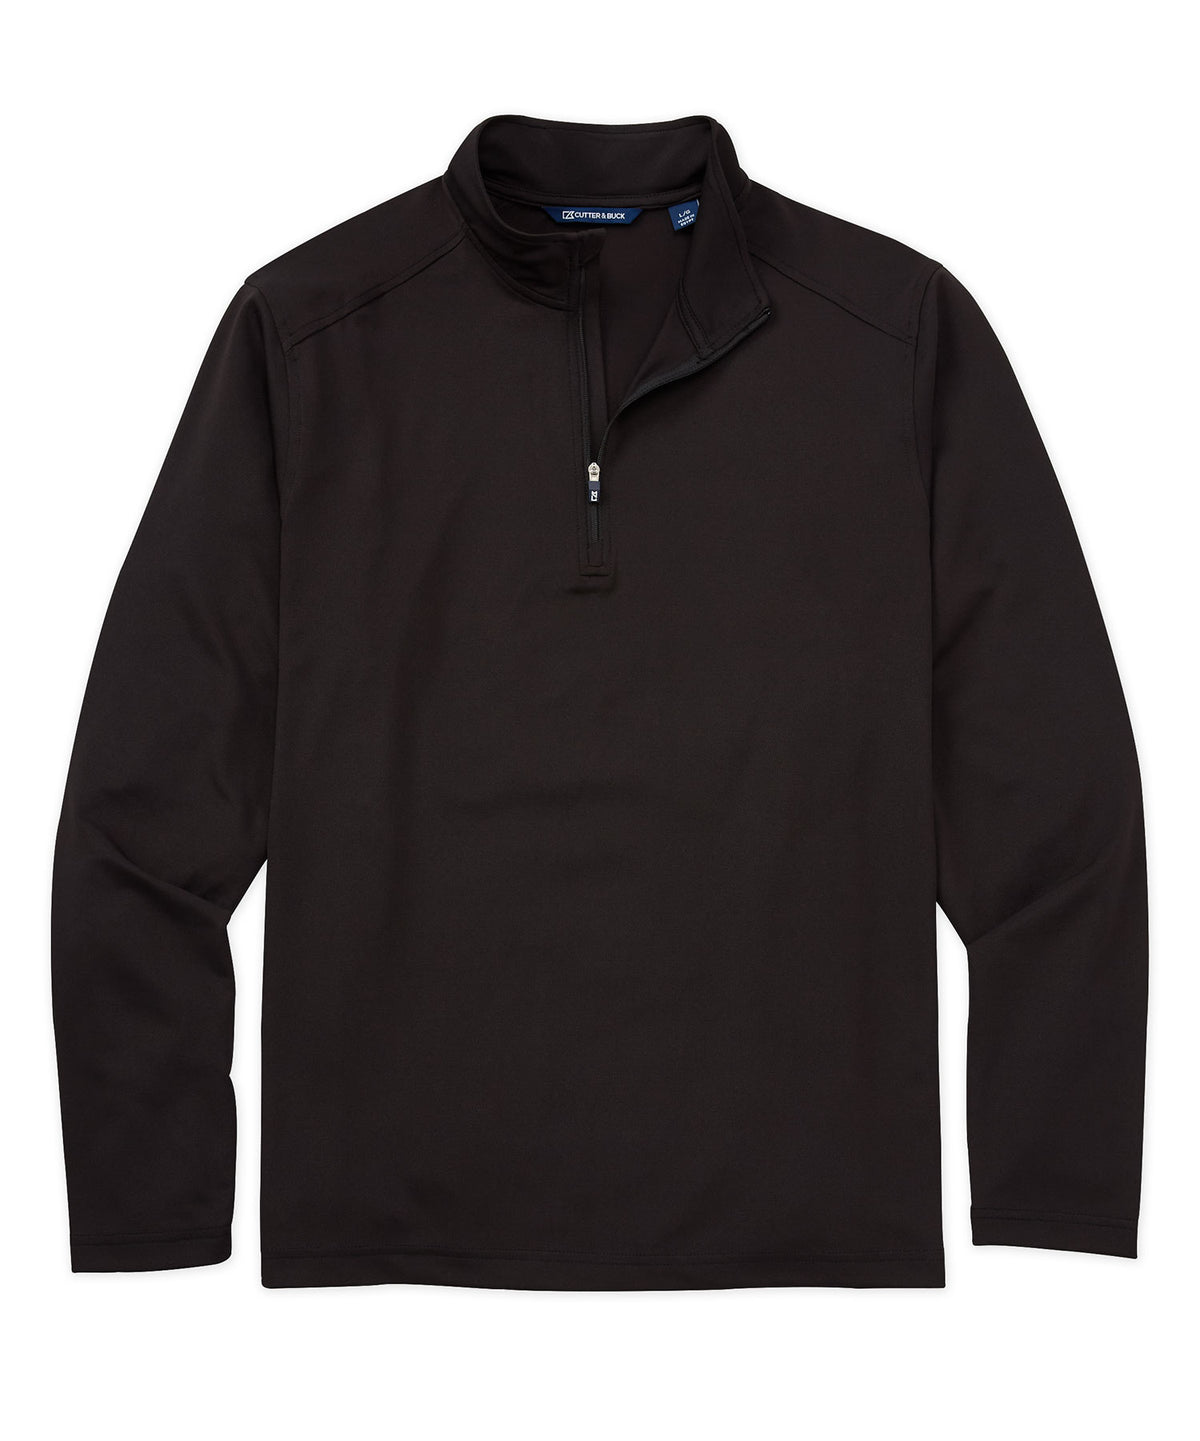 Cutter & Buck Virtue Eco Pique Recycled Quarter Zip Pullover, Big & Tall